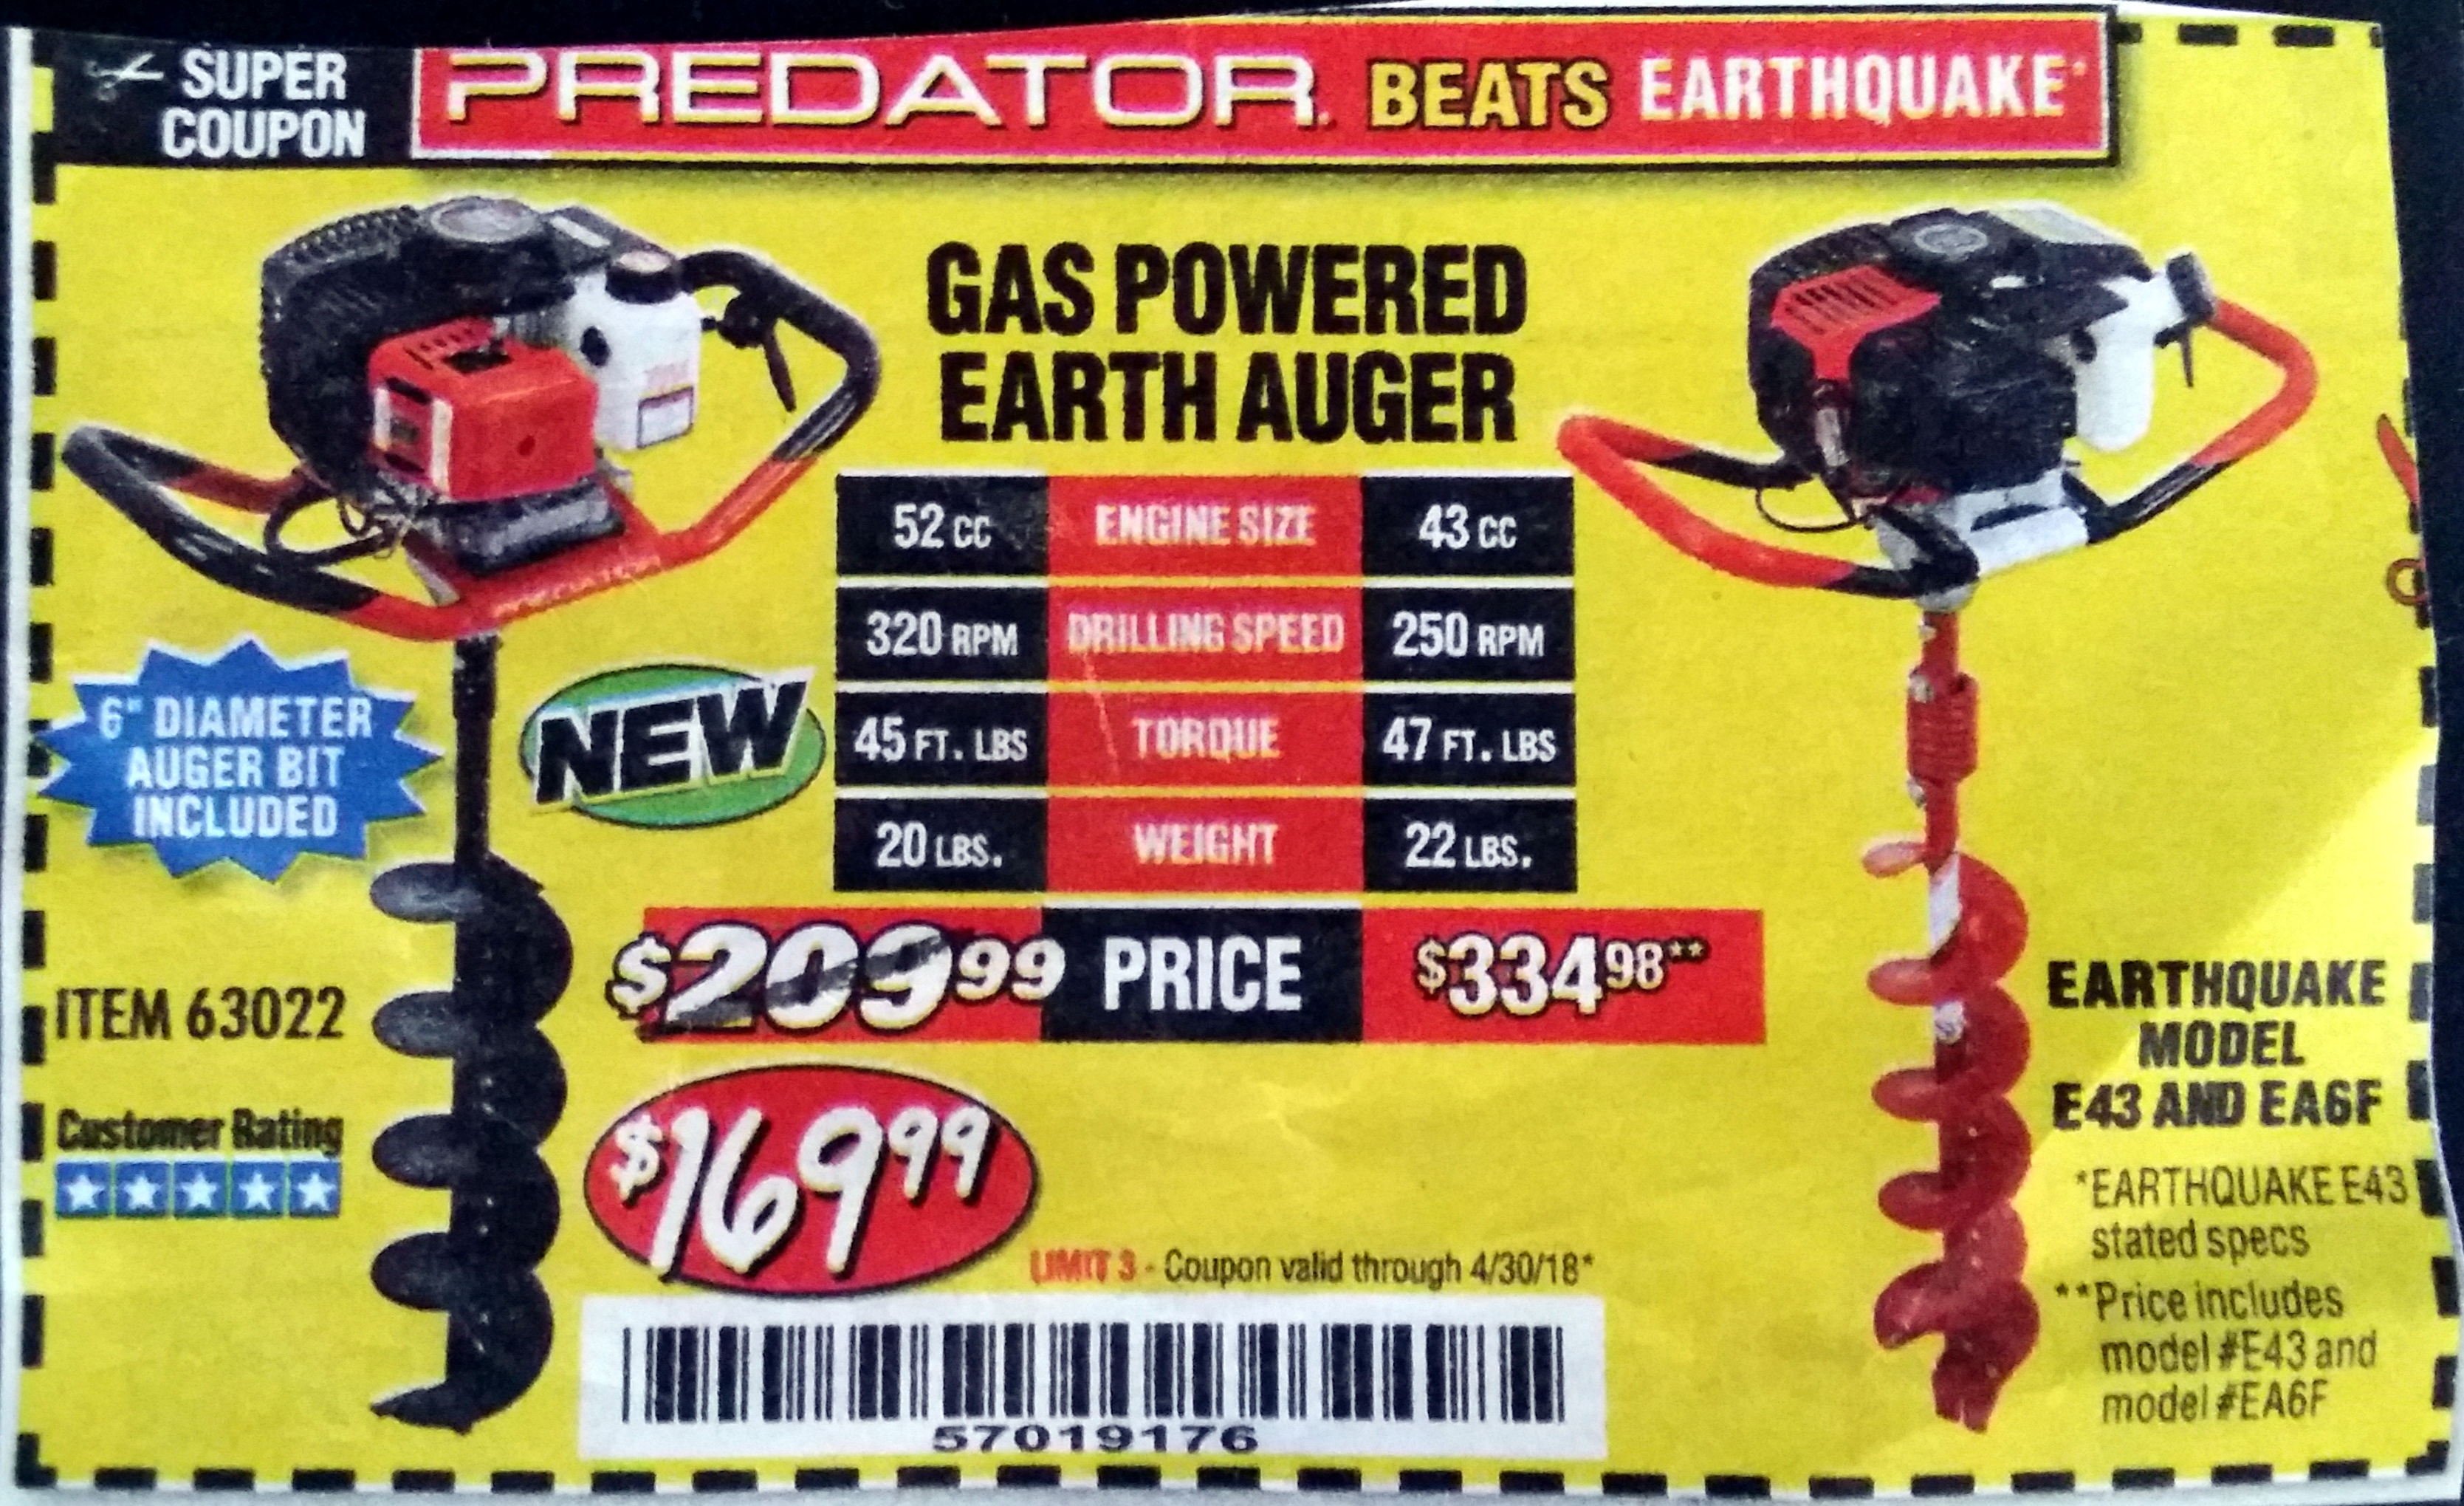 Gas Powered Earth Auger Expires 4/30/18